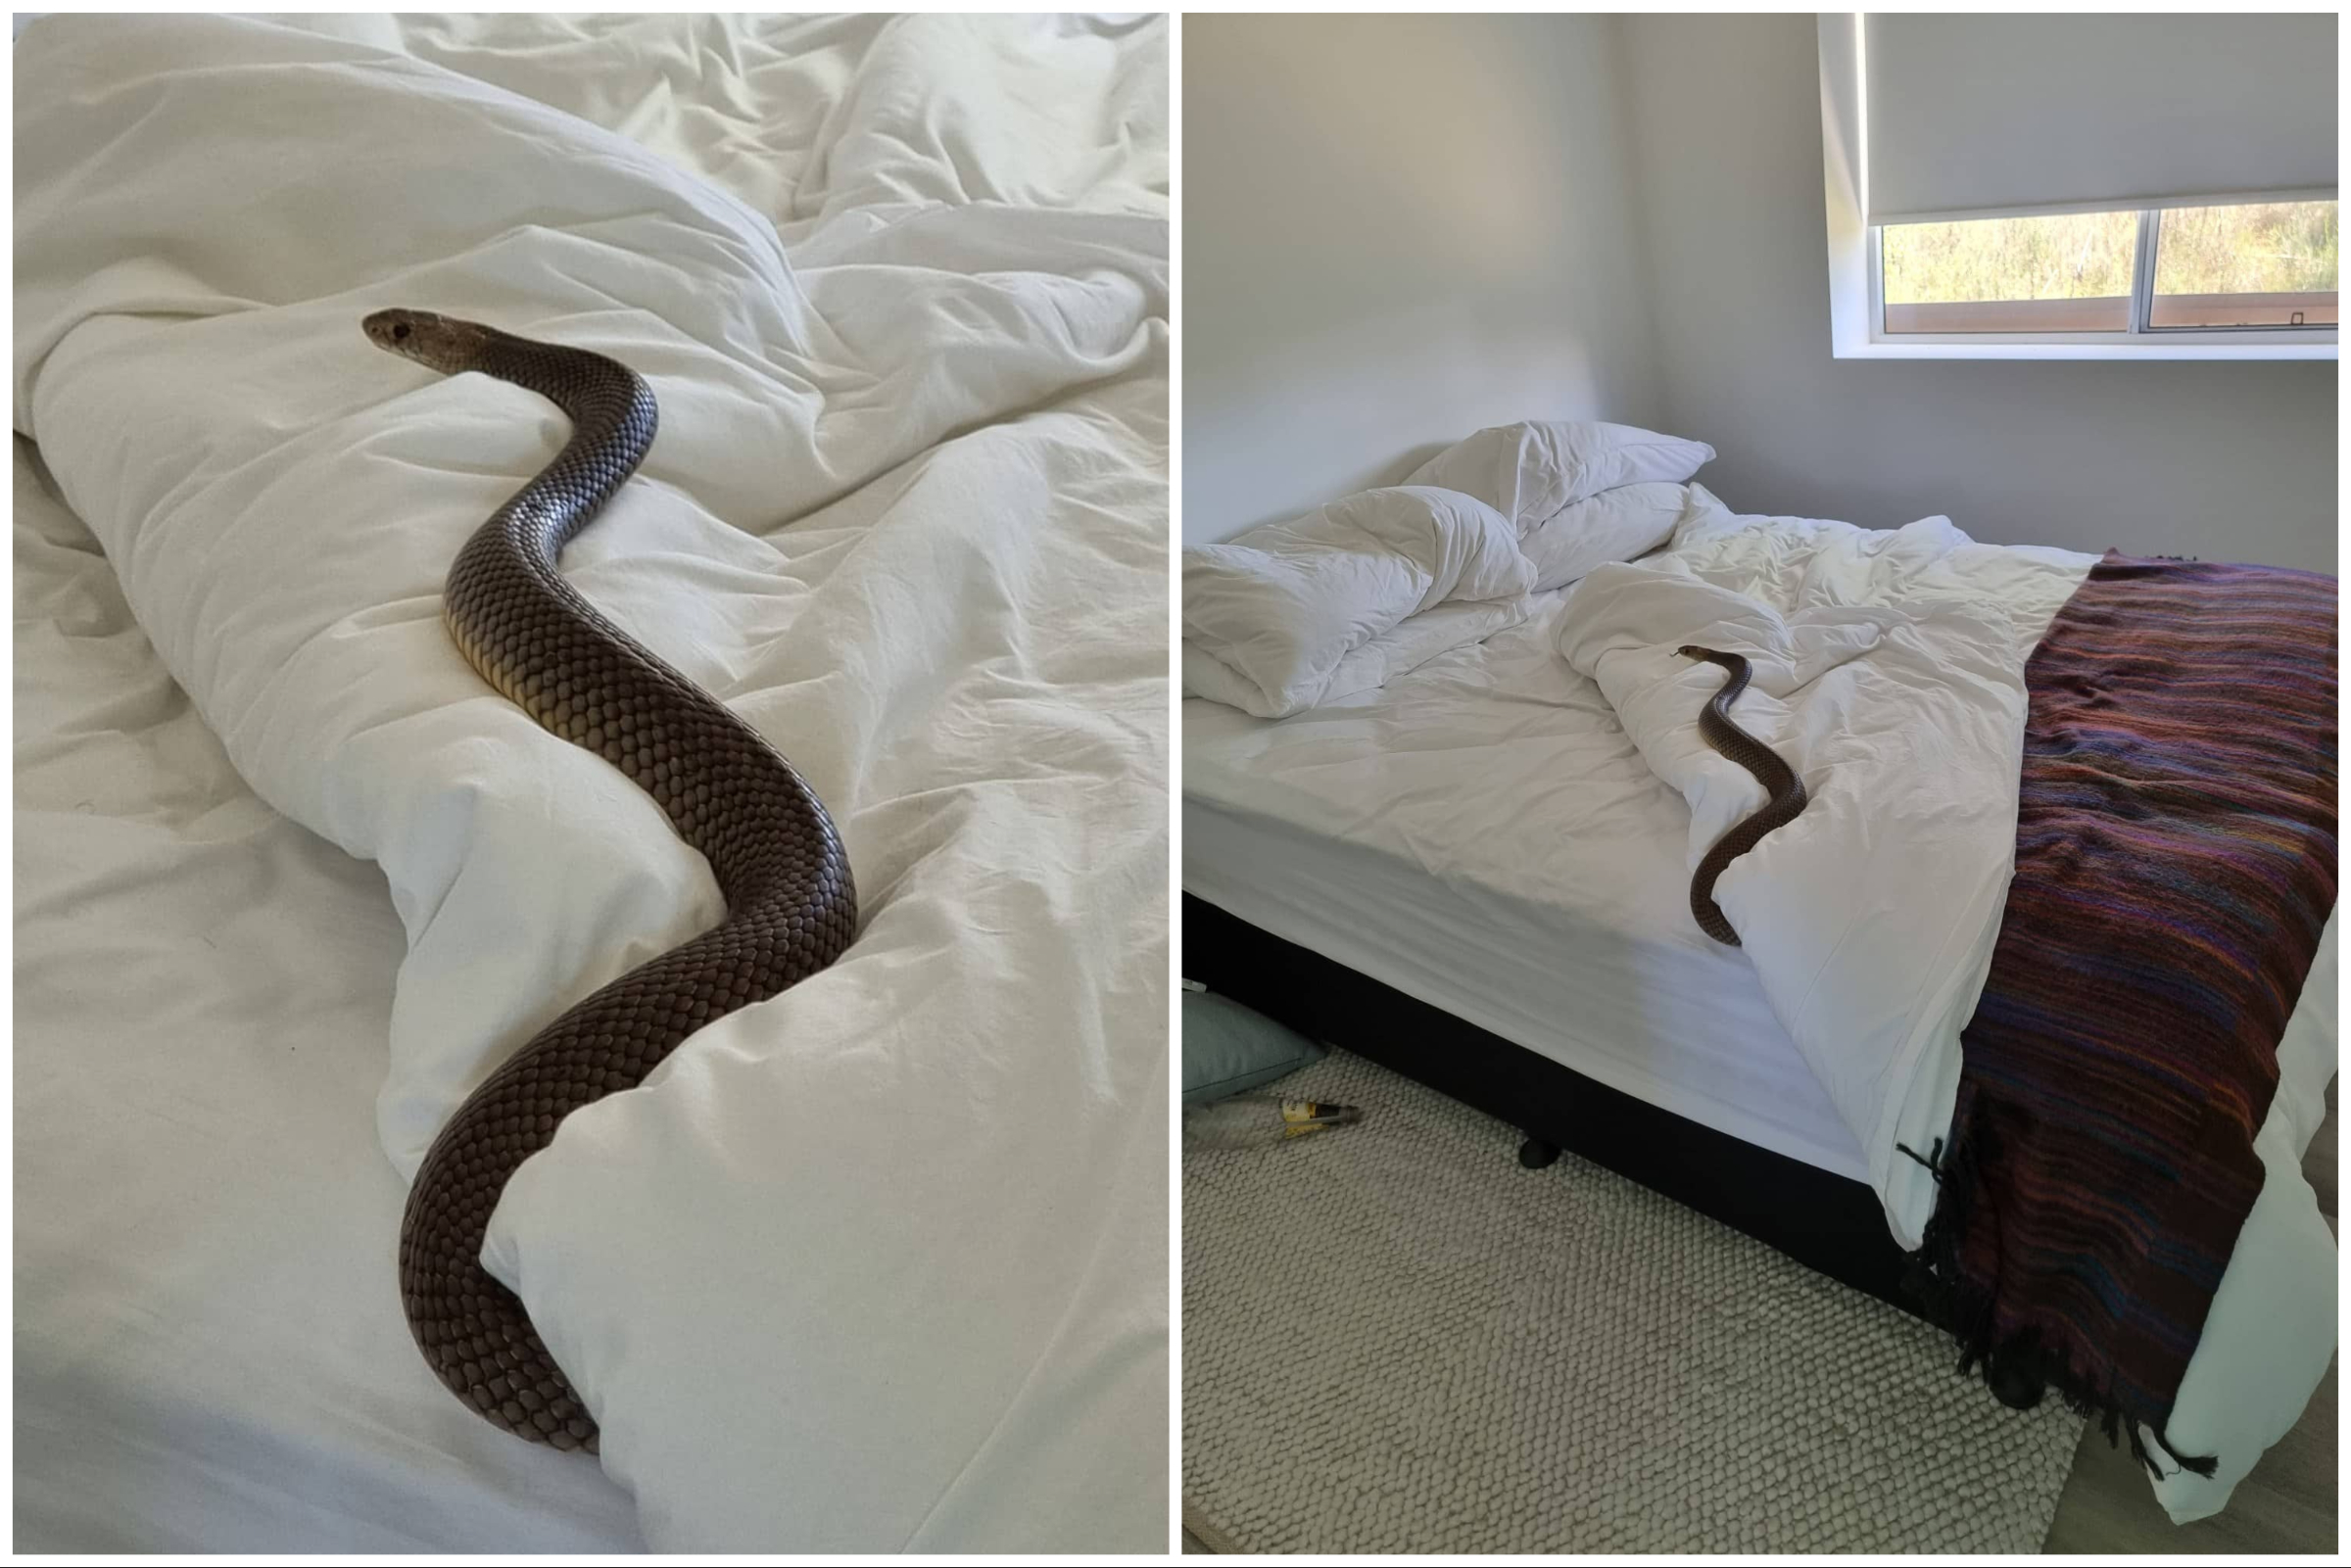 Horror as Woman Finds Deadly 6ft Snake in Her Bed